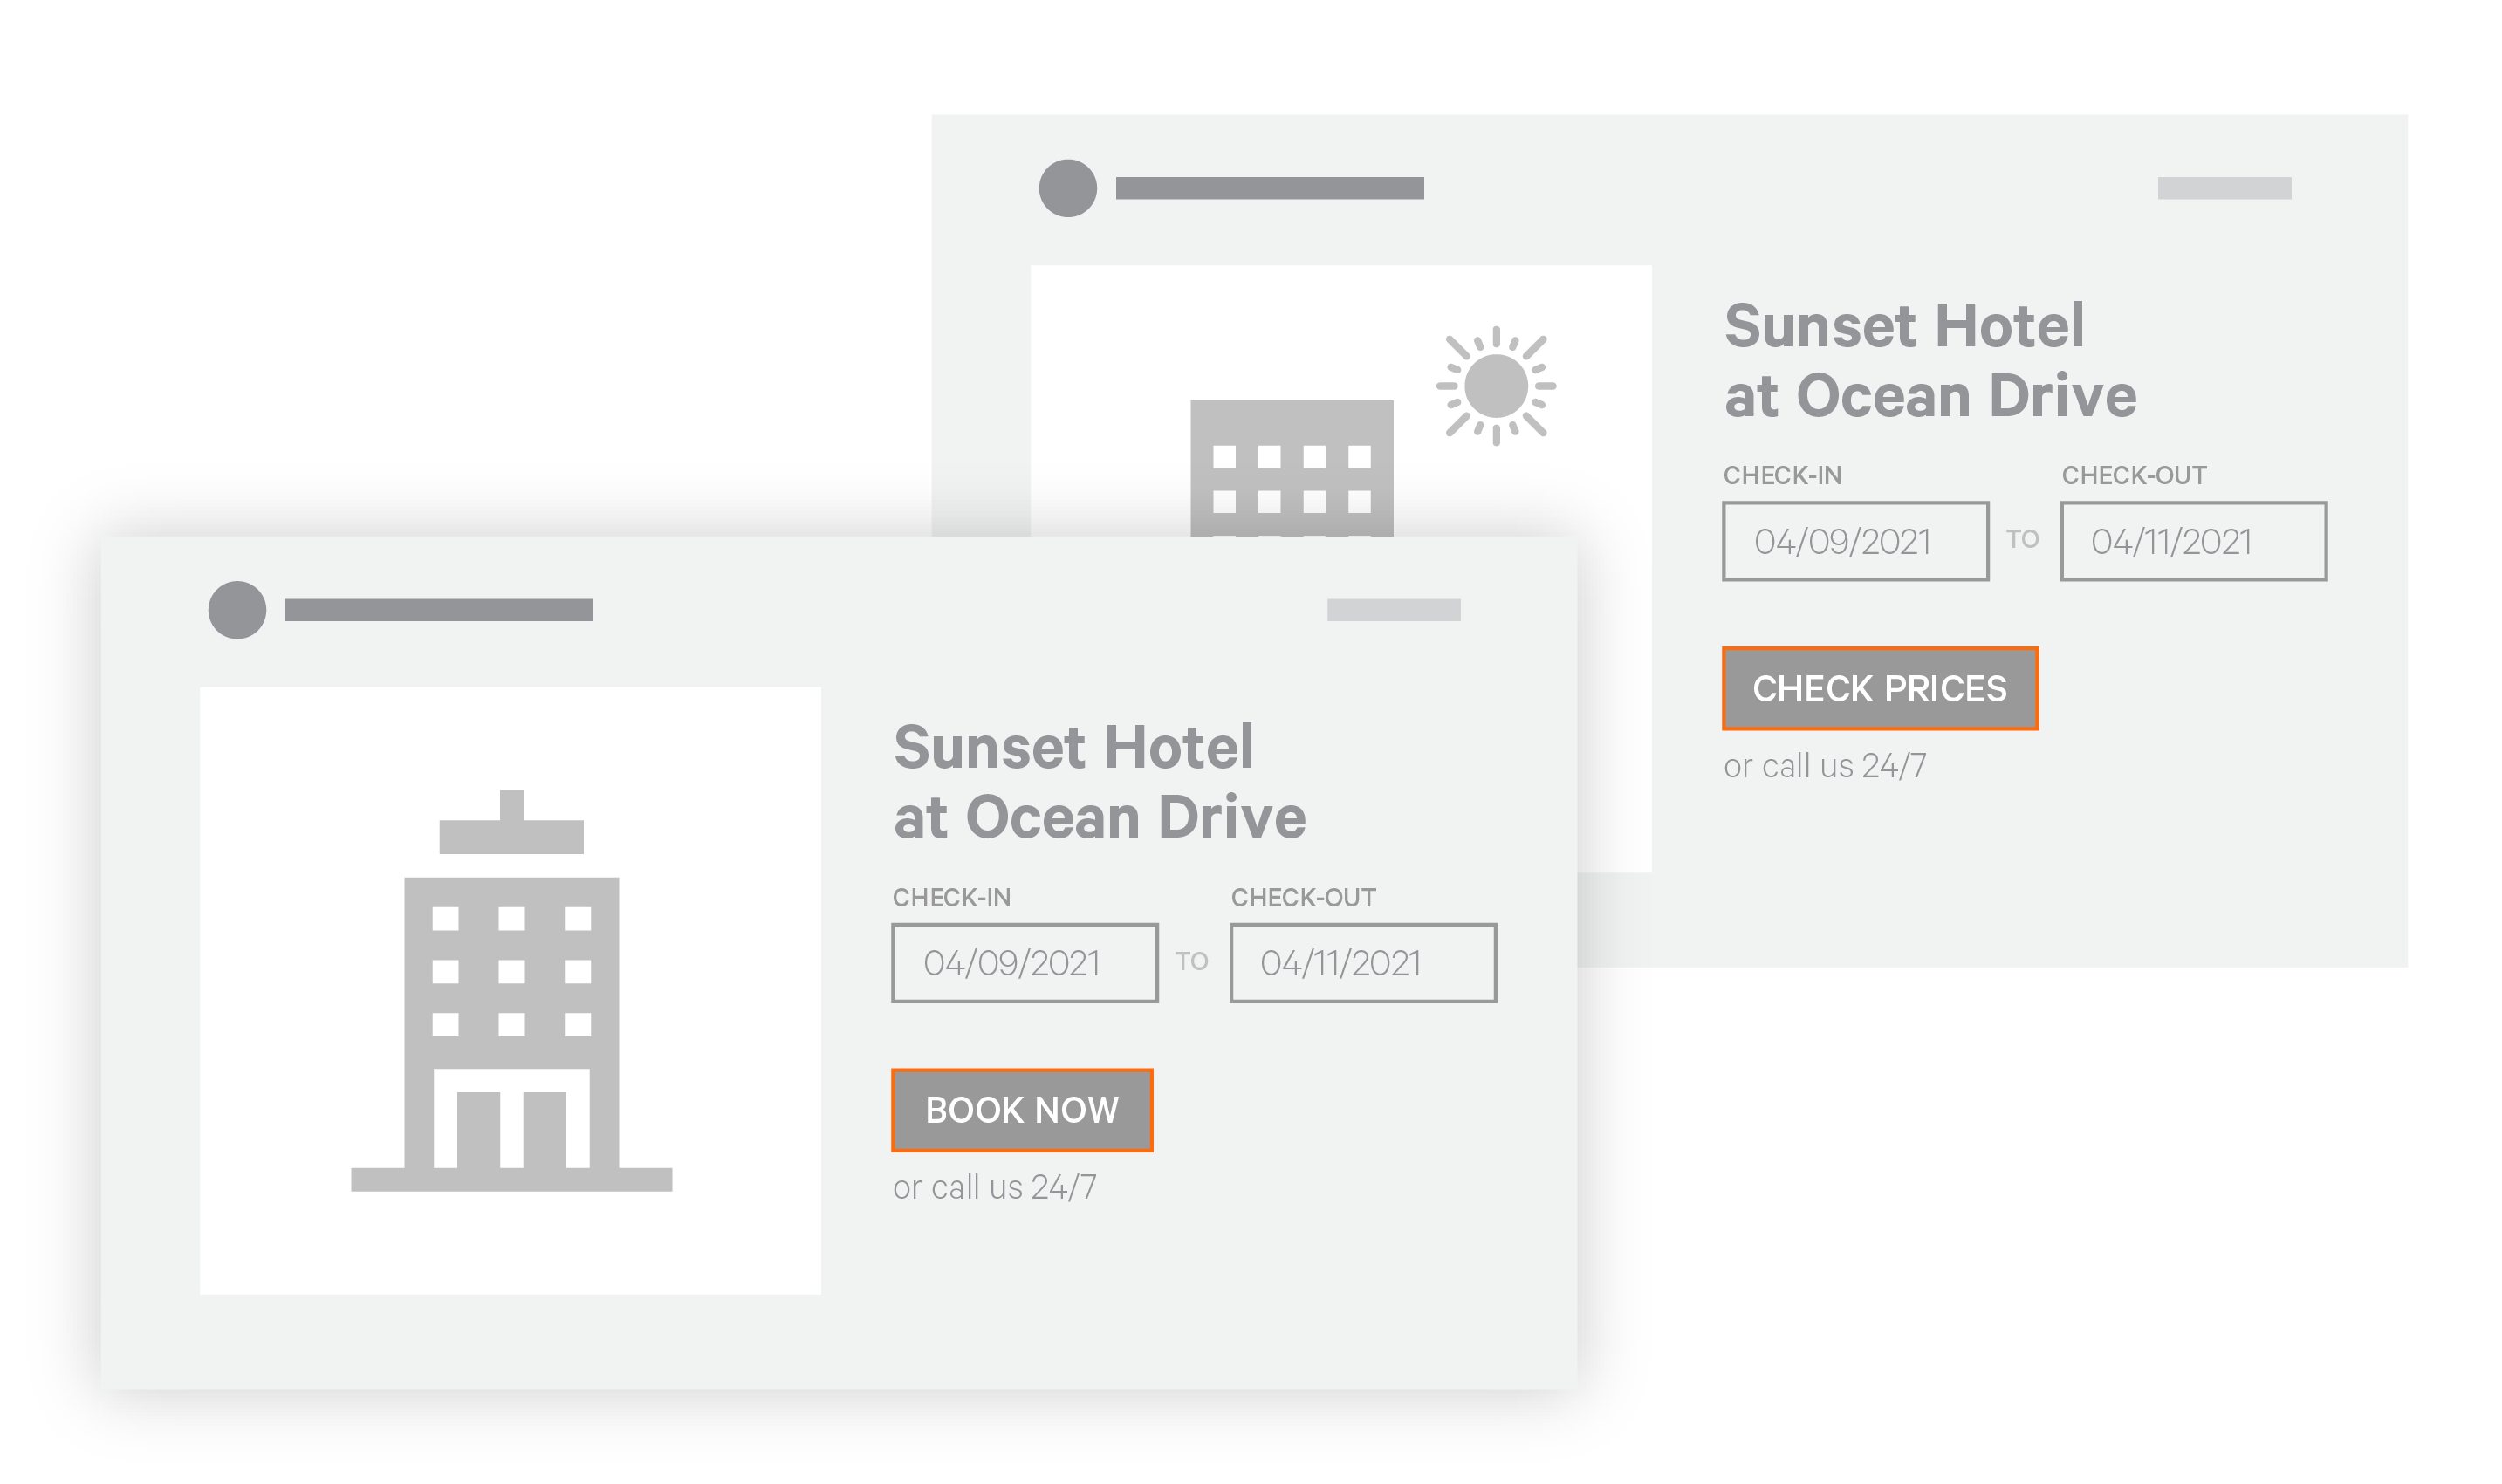 Illustration showing two versions of a hotel details page. One version has a 'CHECK PRICES' button, and the other has a 'BOOK NOW' button